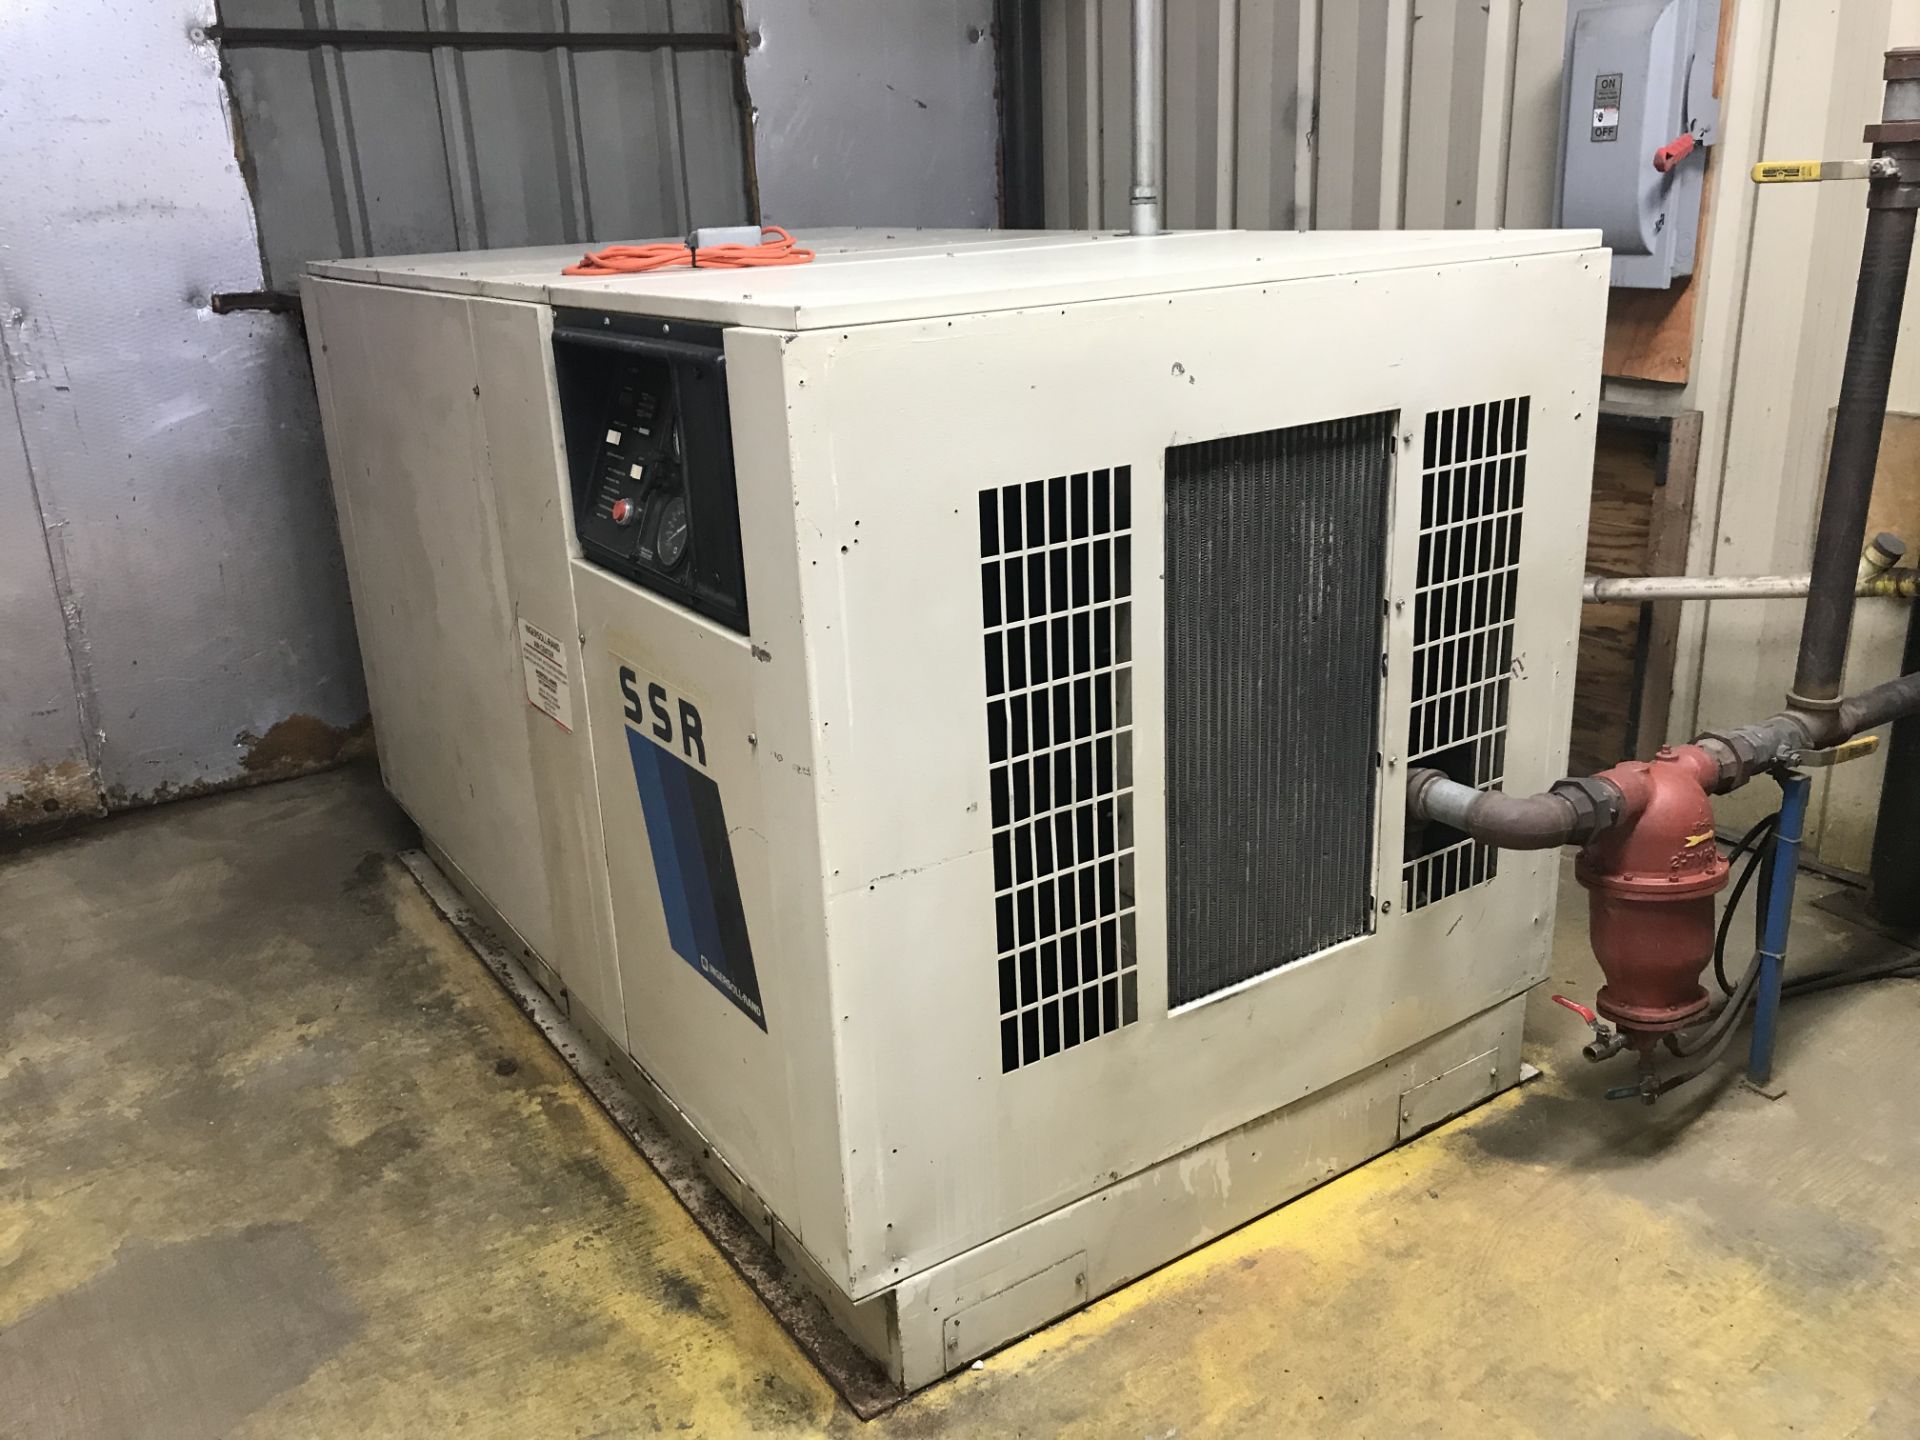 (Located in Lebanon, IN) Ingersoll Rand Compressed Air Dryer, Model# P550, Serial# 891P212